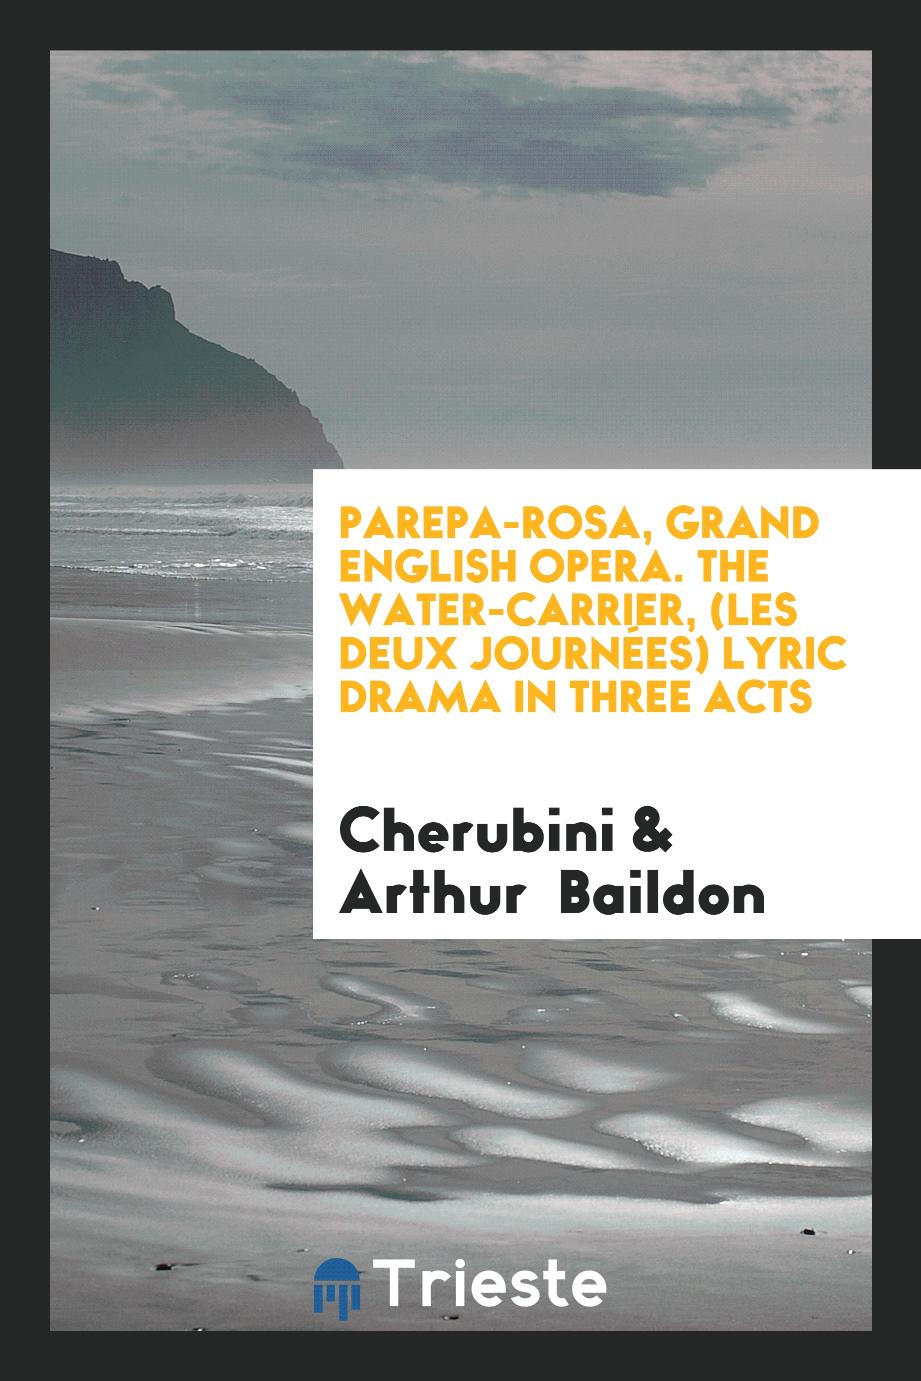 Parepa-rosa, grand english opera. The Water-carrier, (Les Deux Journées) Lyric Drama in Three Acts